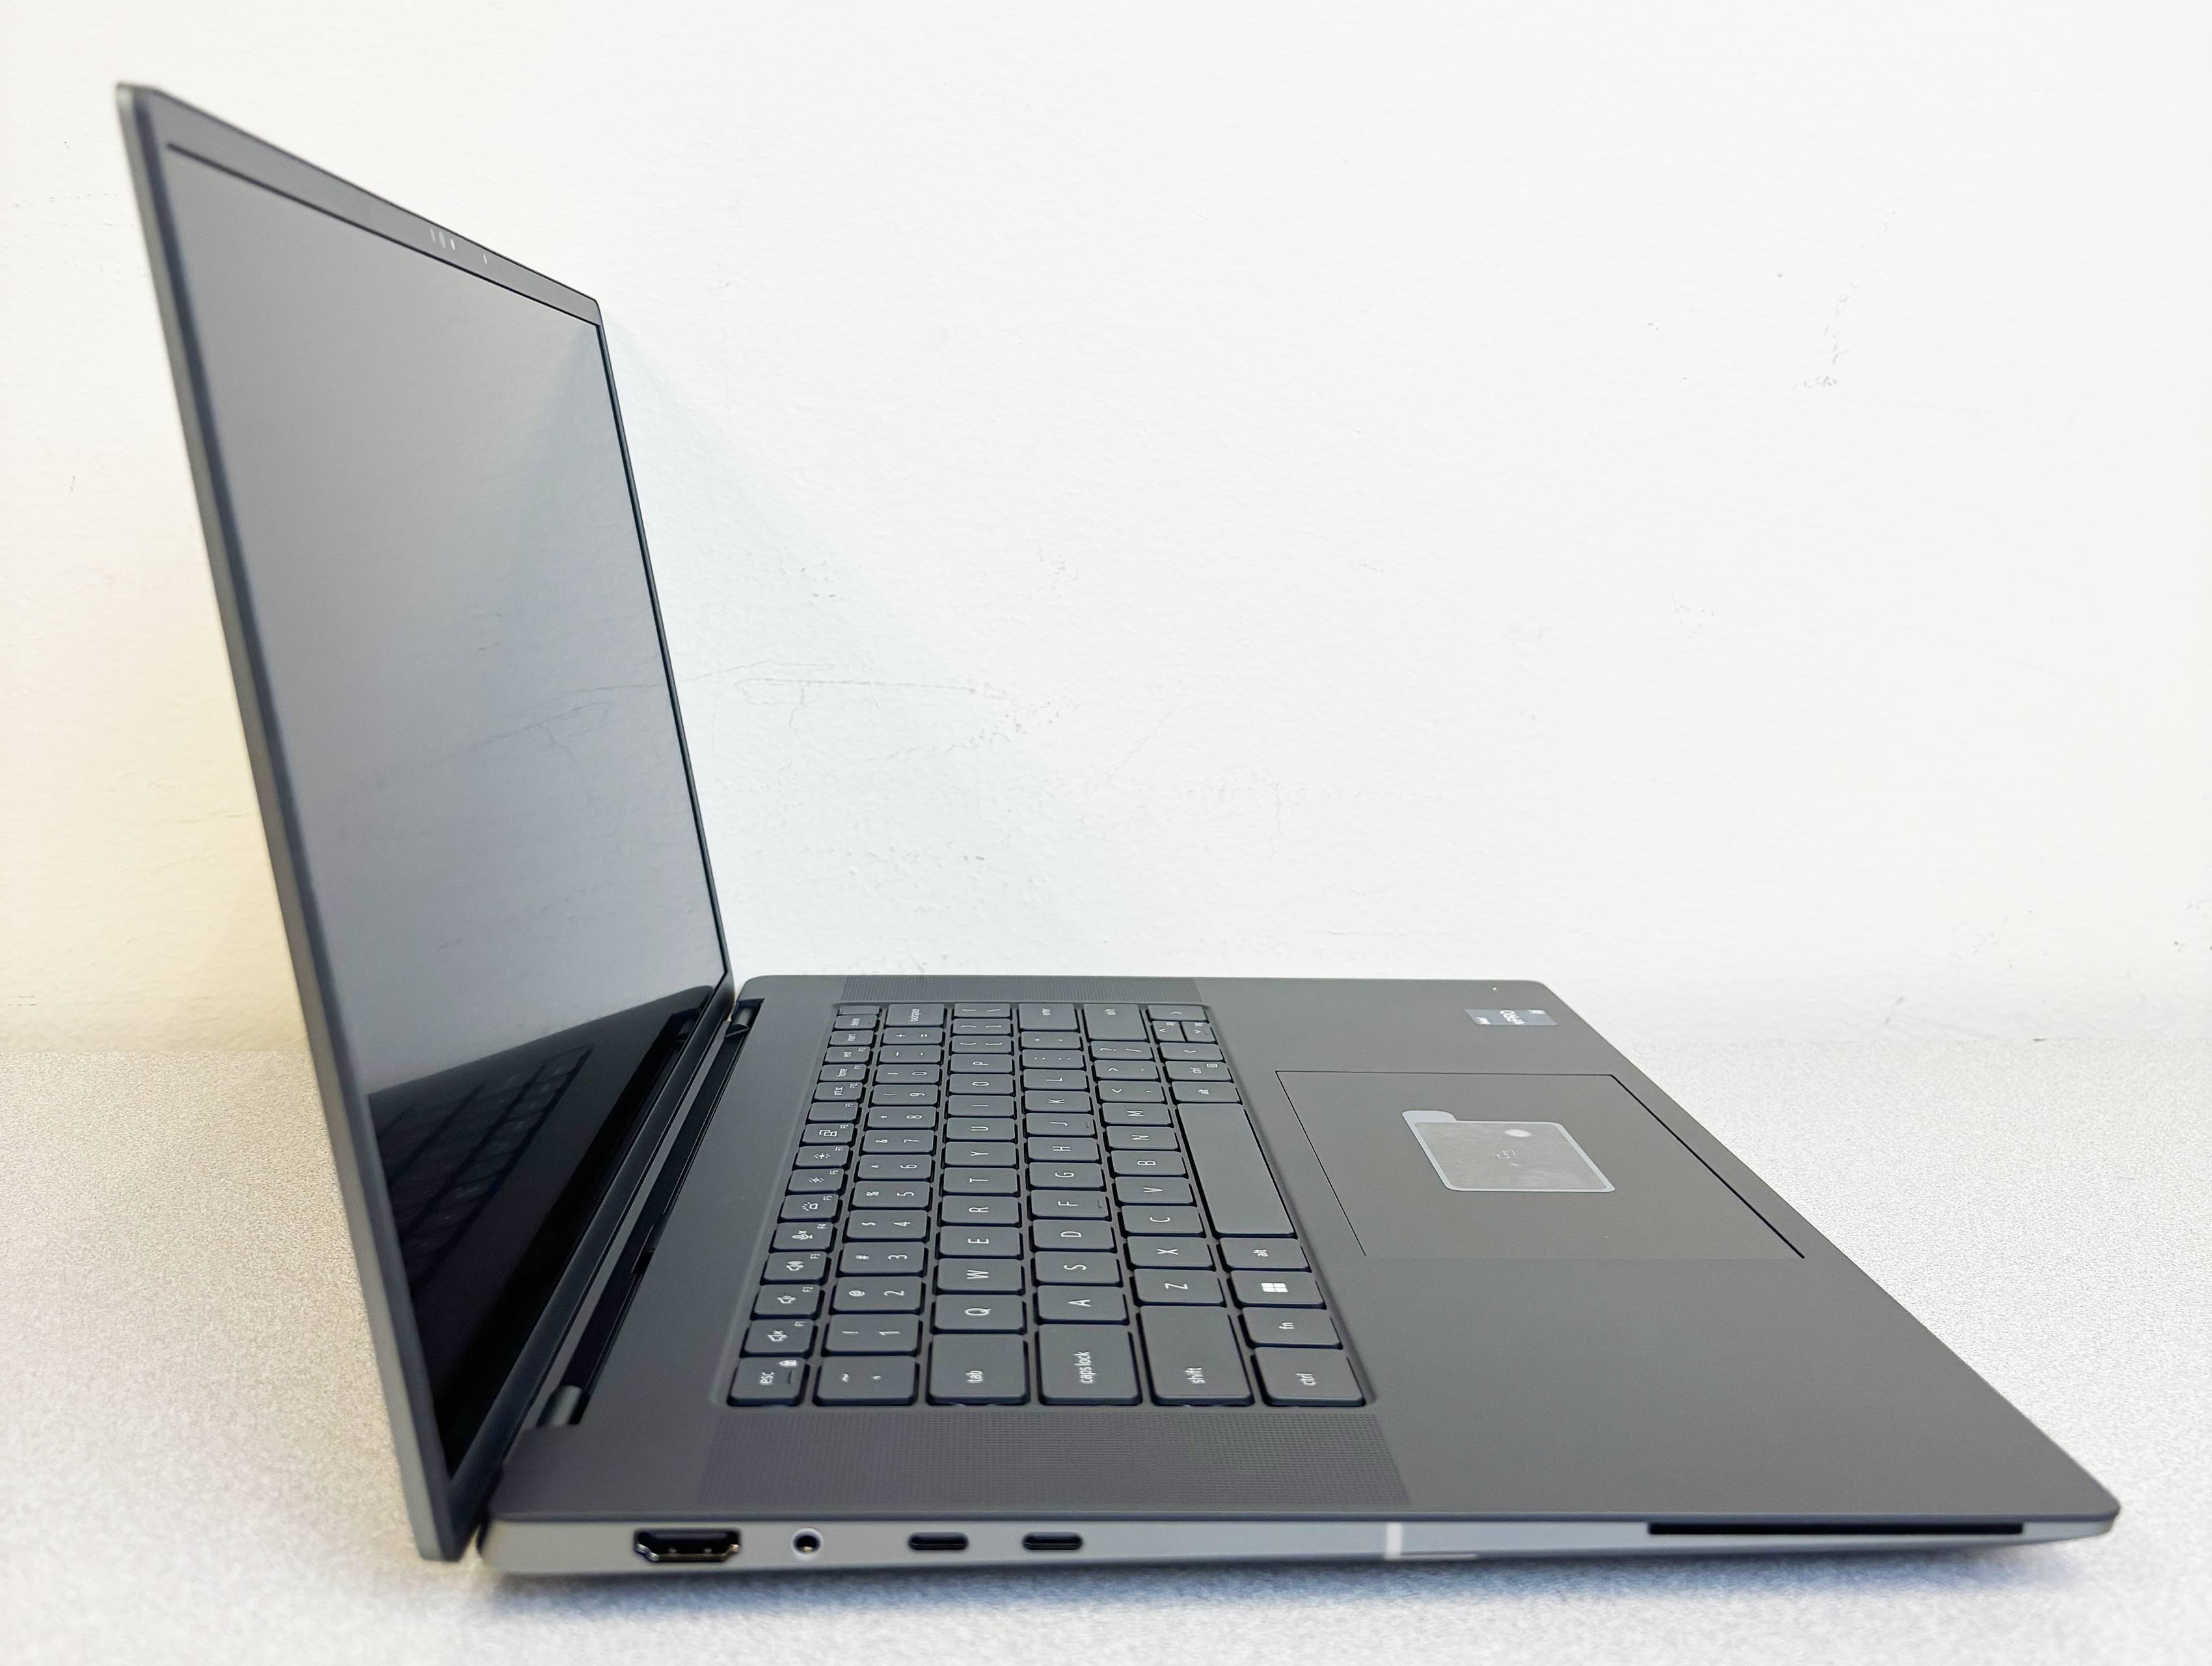 Dell-Precision-Leftsideview-open